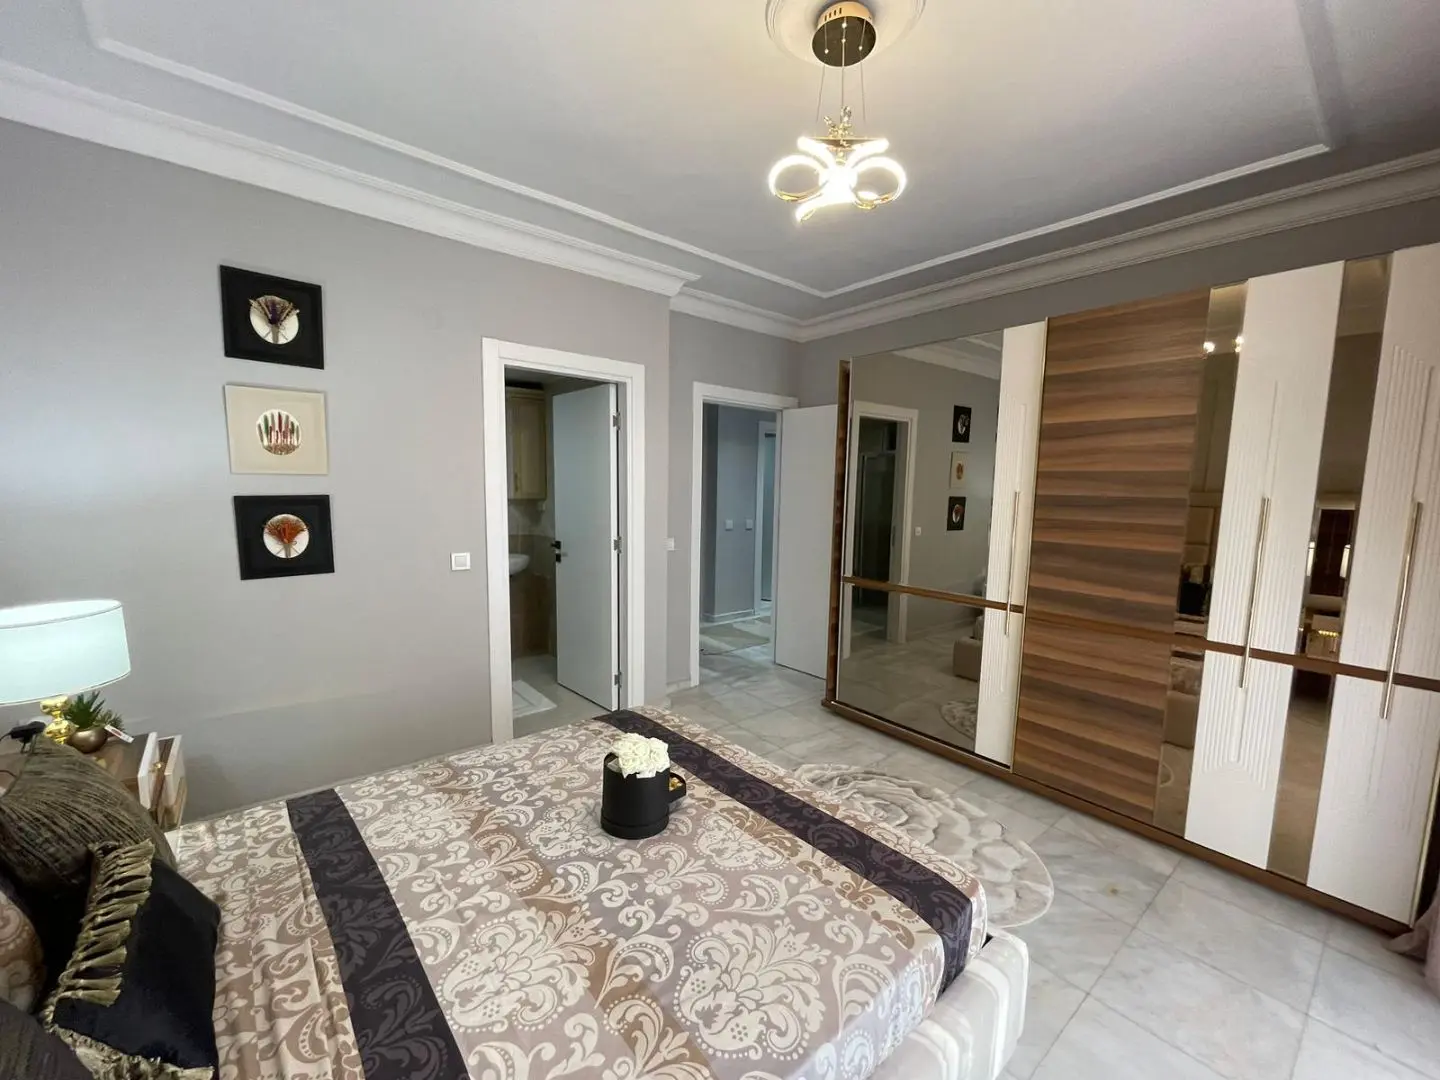 SPACIOUS, LUXURIOUS FURNISHED 2+1 FLAT IN ALANYA OBA